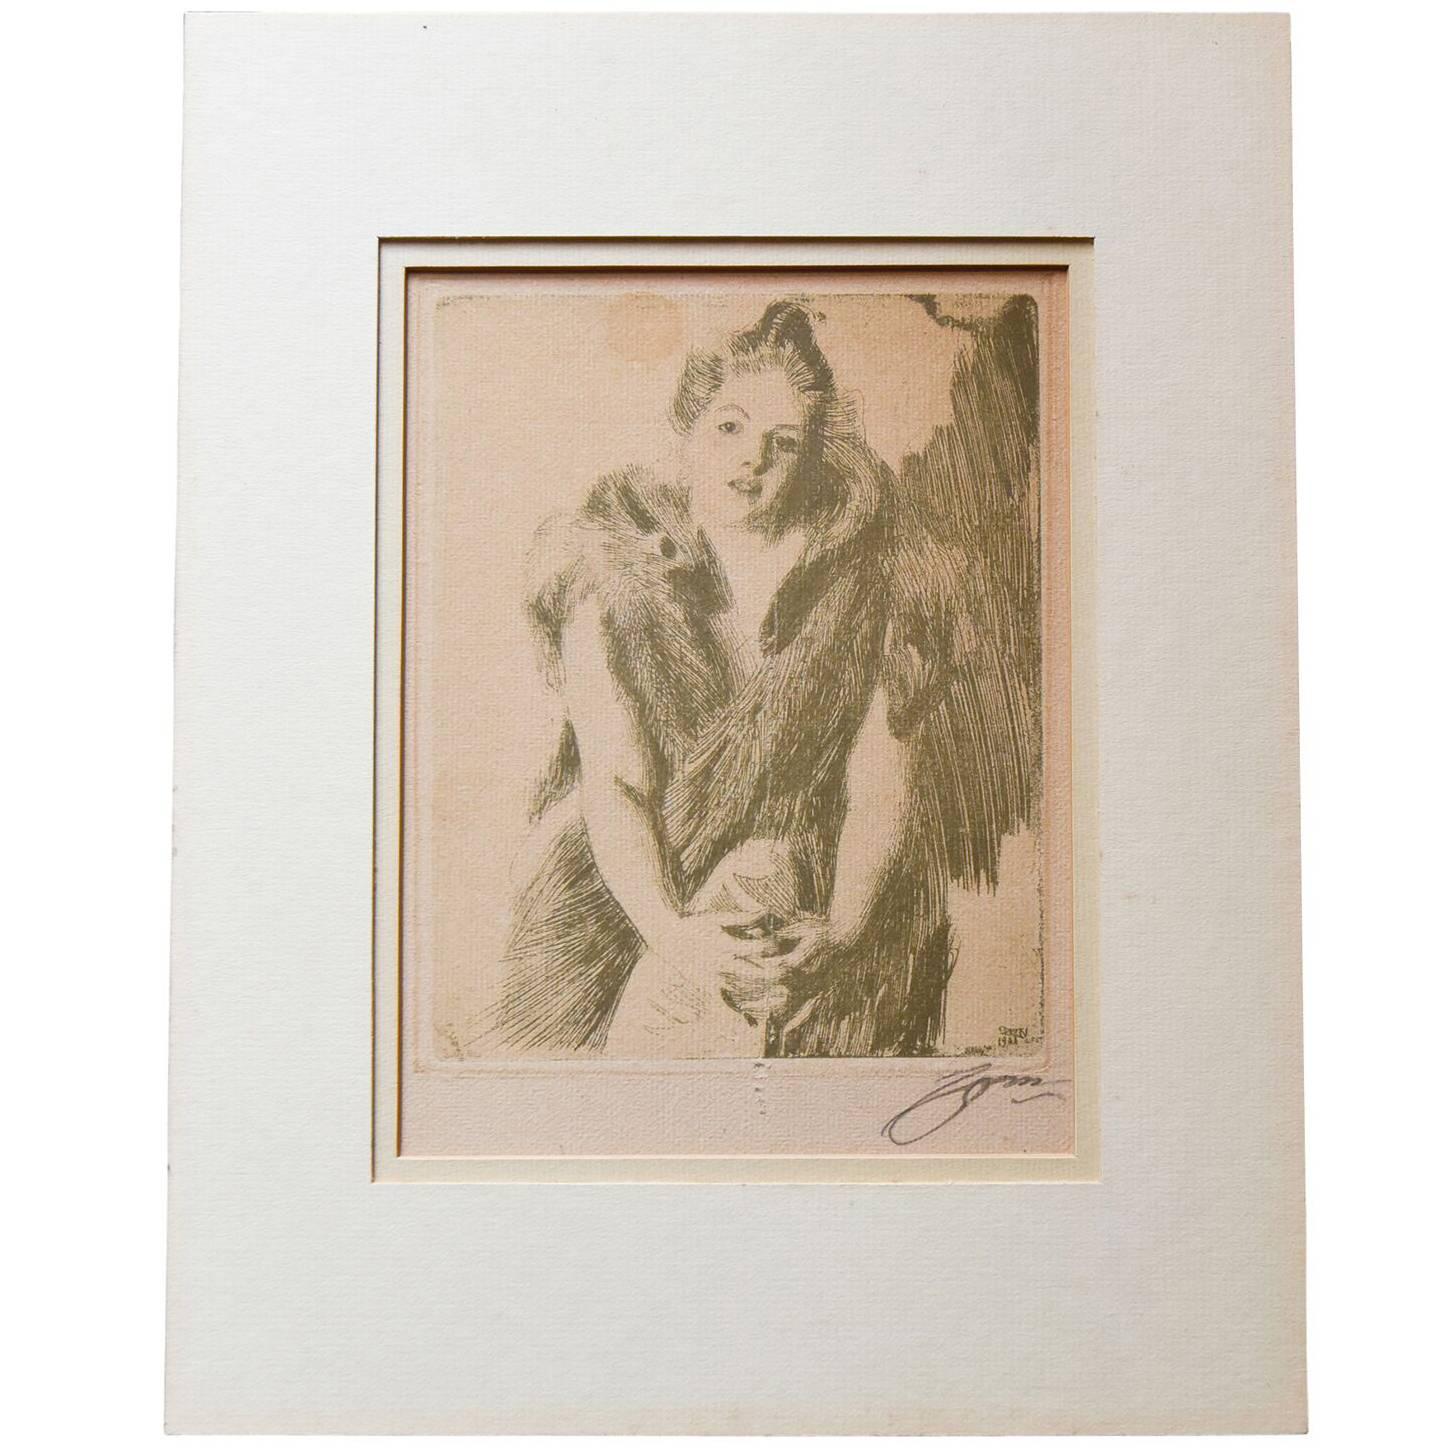 Bookplate Sketch Signed by Anders Zorn